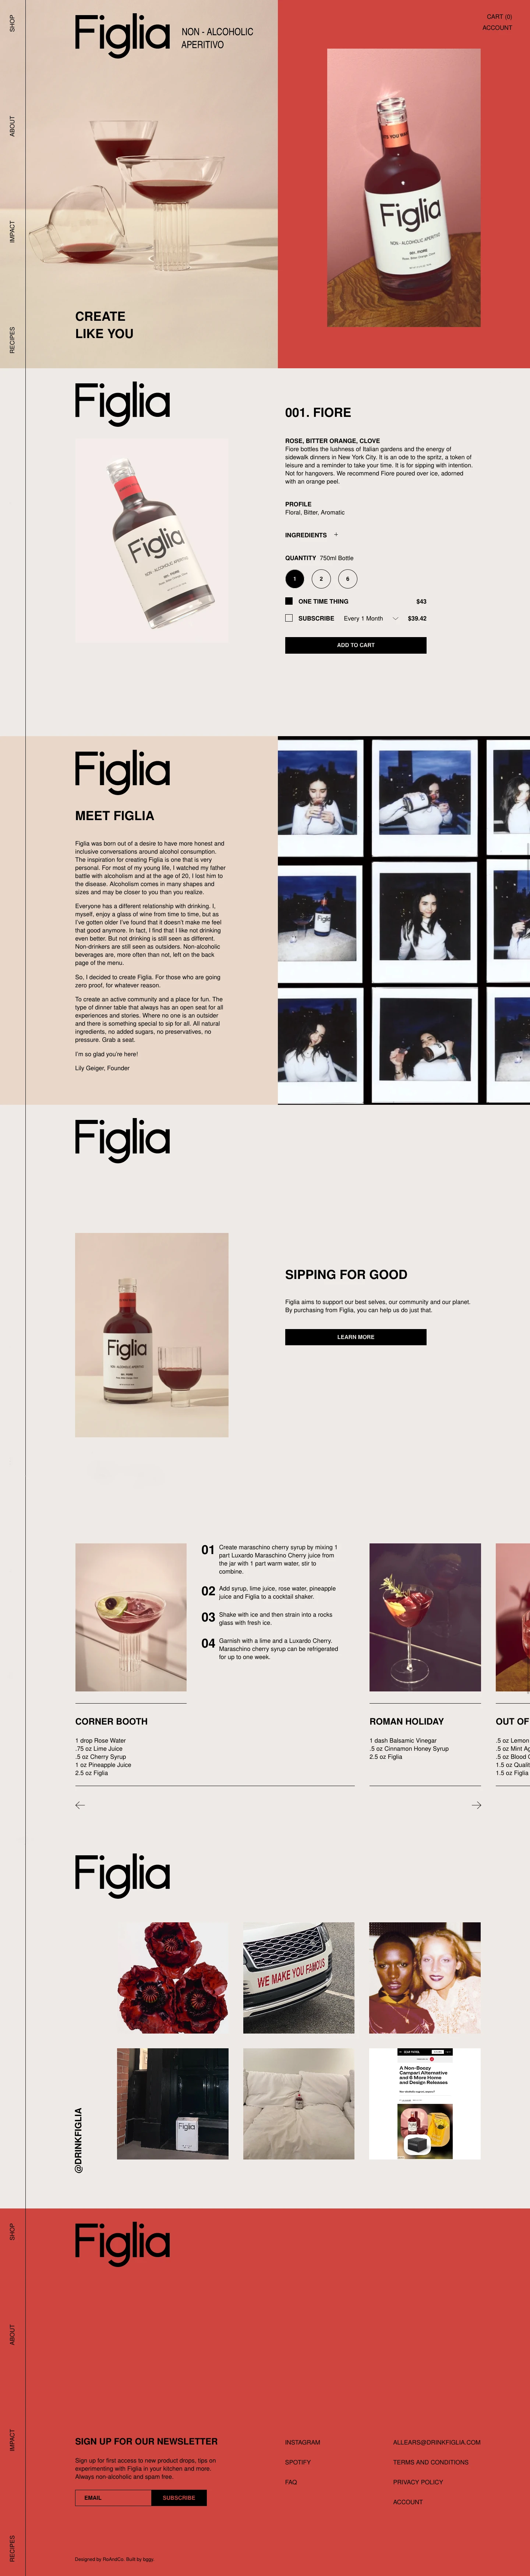 Figlia Landing Page Example: A non-alcoholic aperitivo created for moments you want to remember.